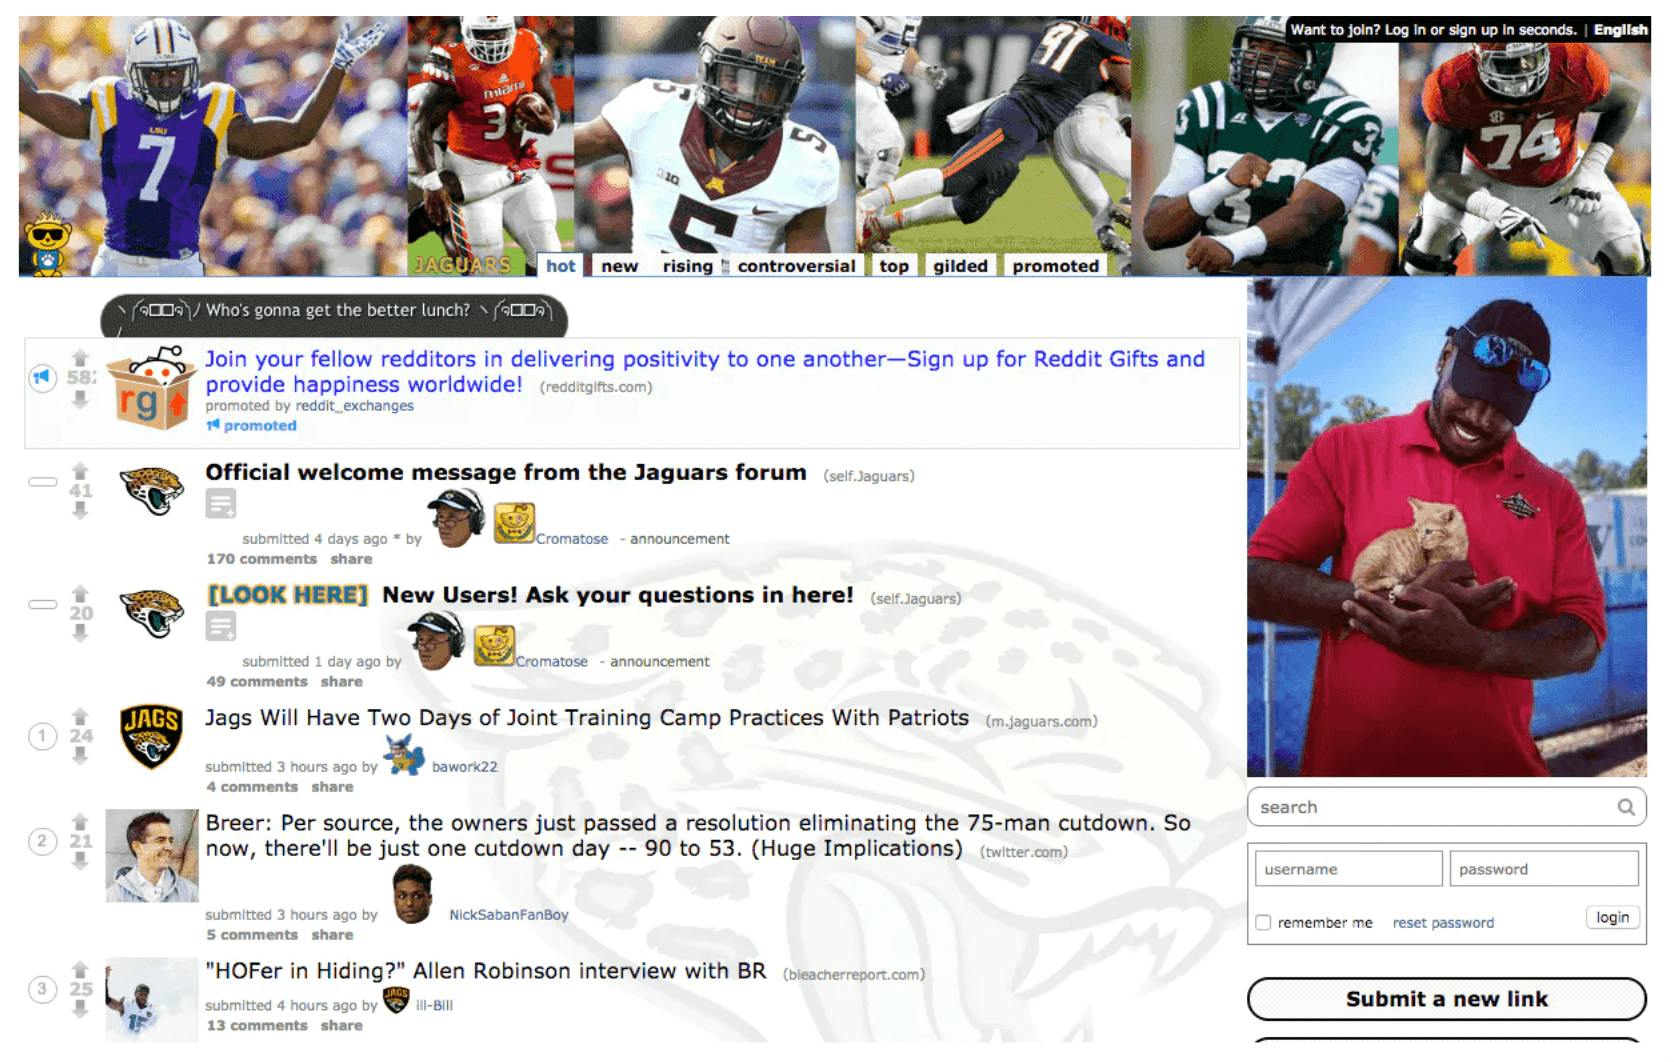 A sports Reddit community with images of football players at the top. 